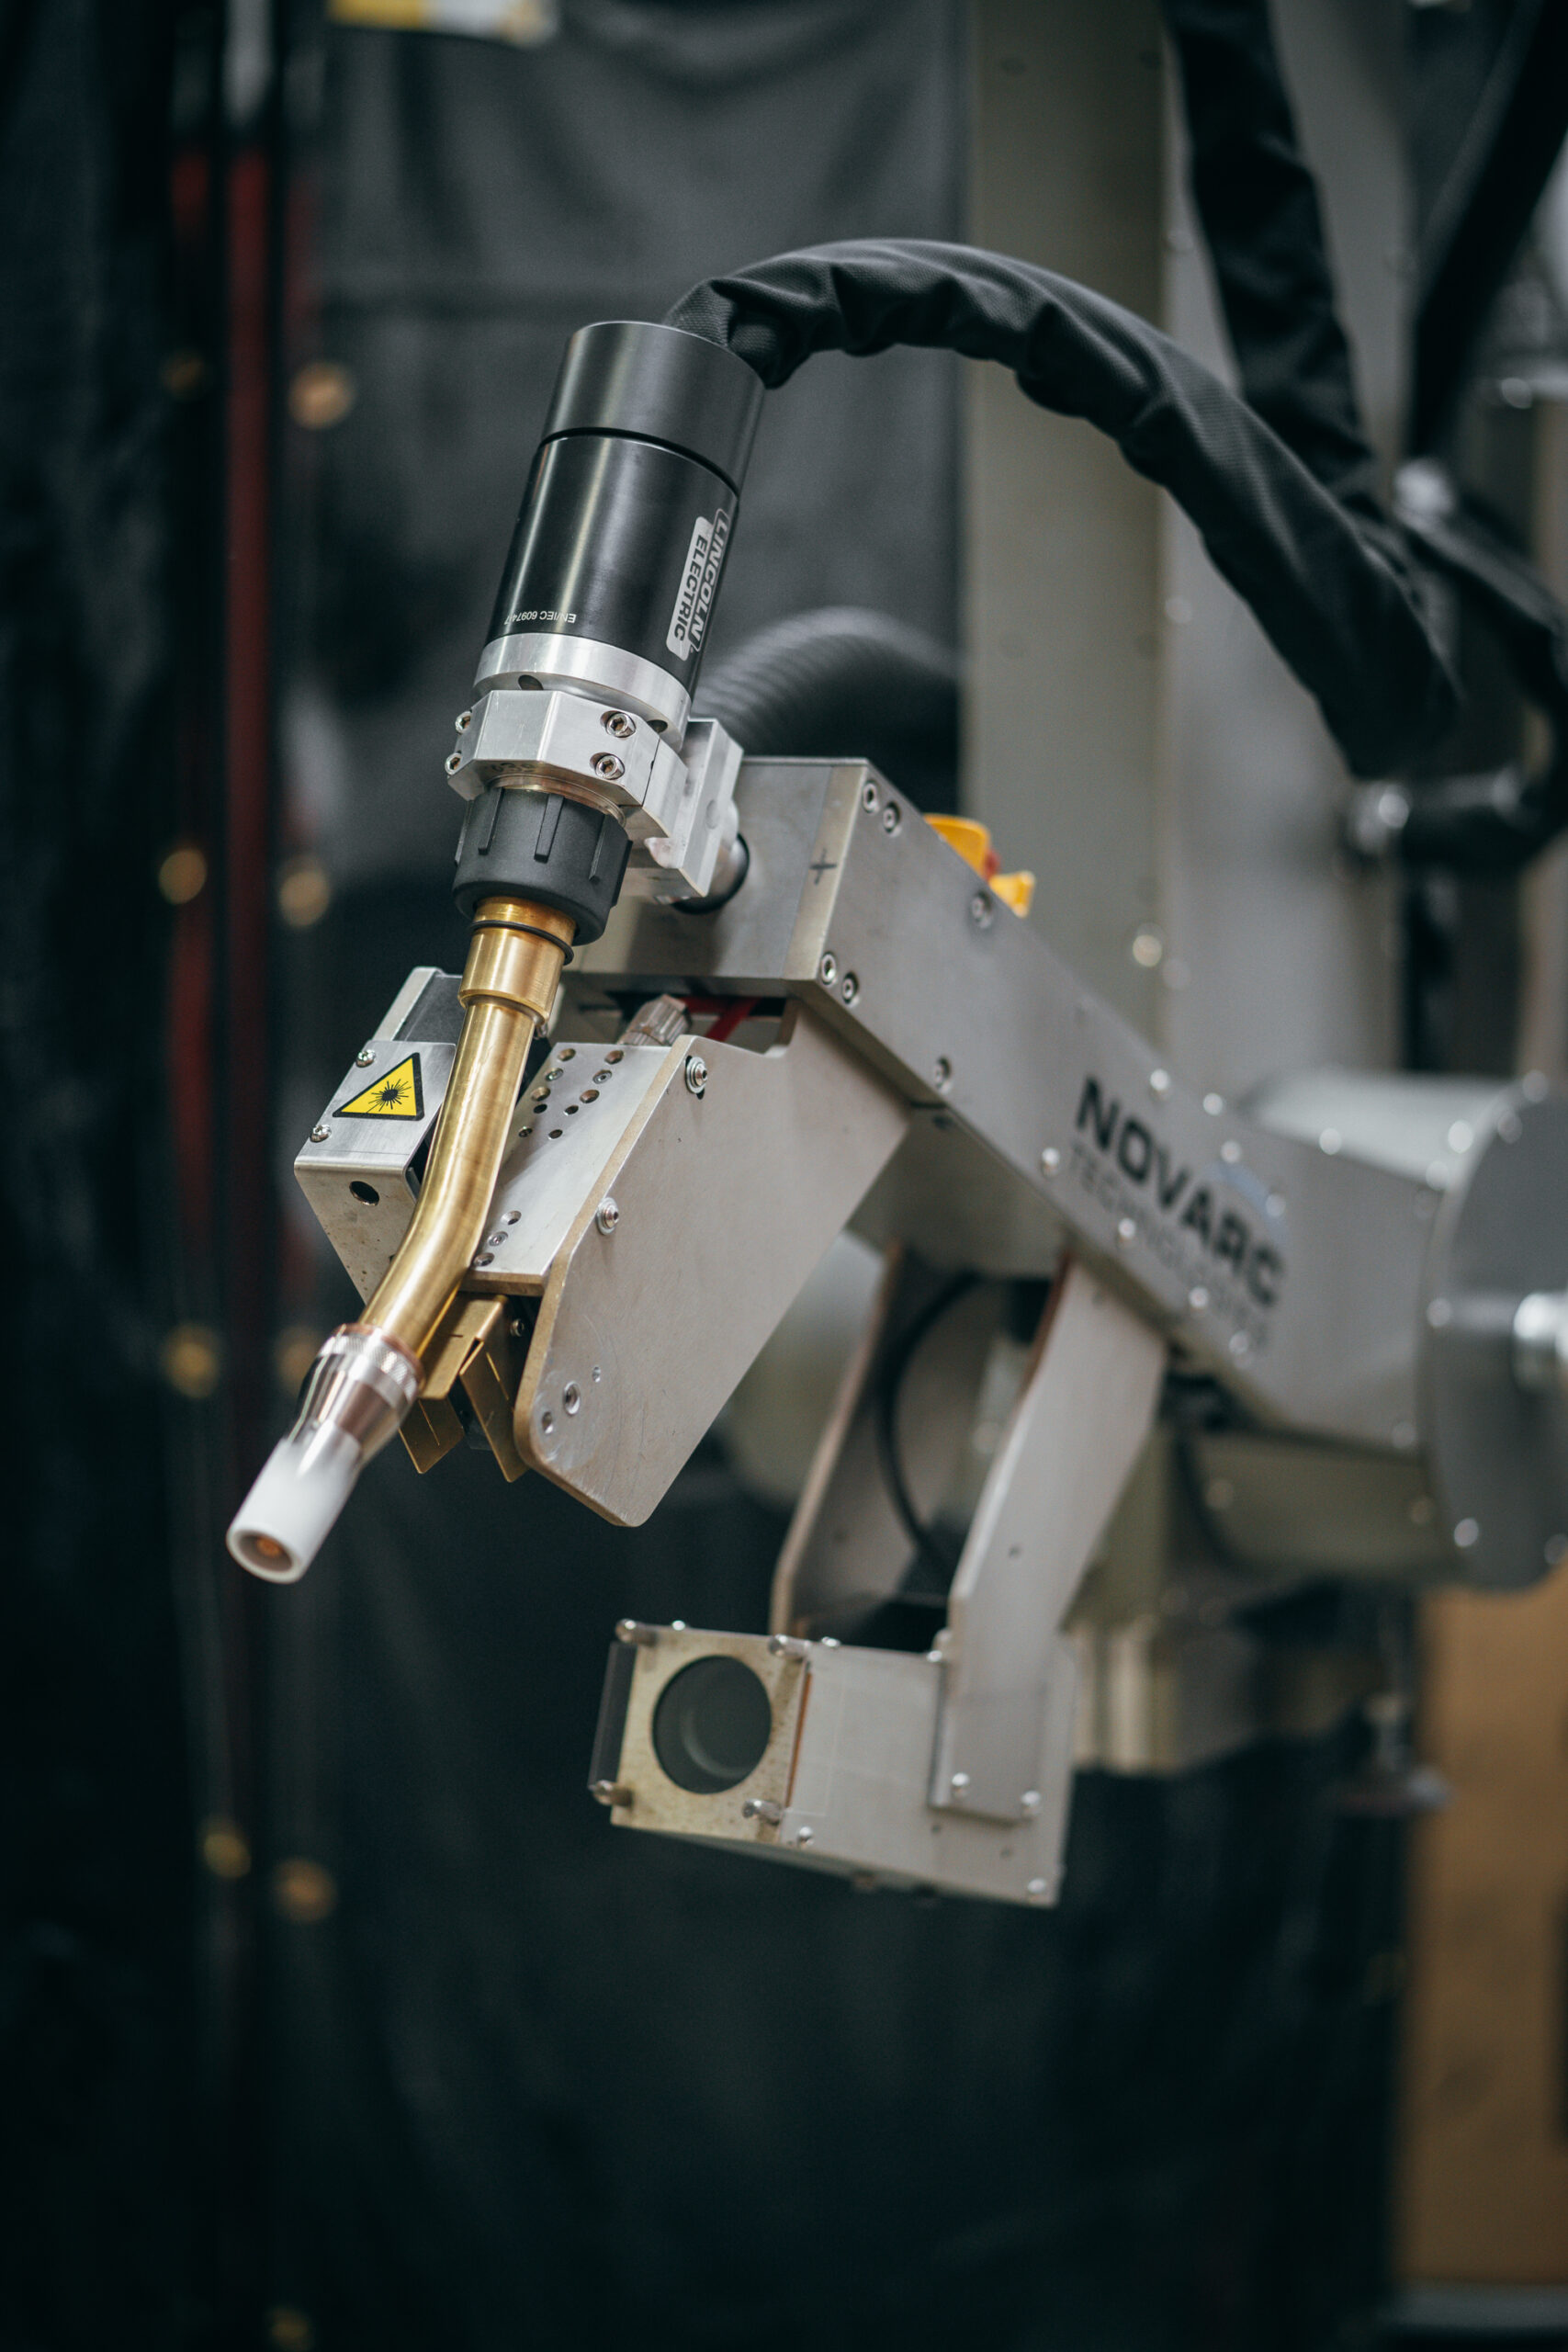 NOVARC TECHNOLOGIES COBOT SWR+HYPERFILL PROVIDES GAME-CHANGING TECHNOLOGY TO INCREASE HEAVY FABRICATION  PRODUCTIVITY